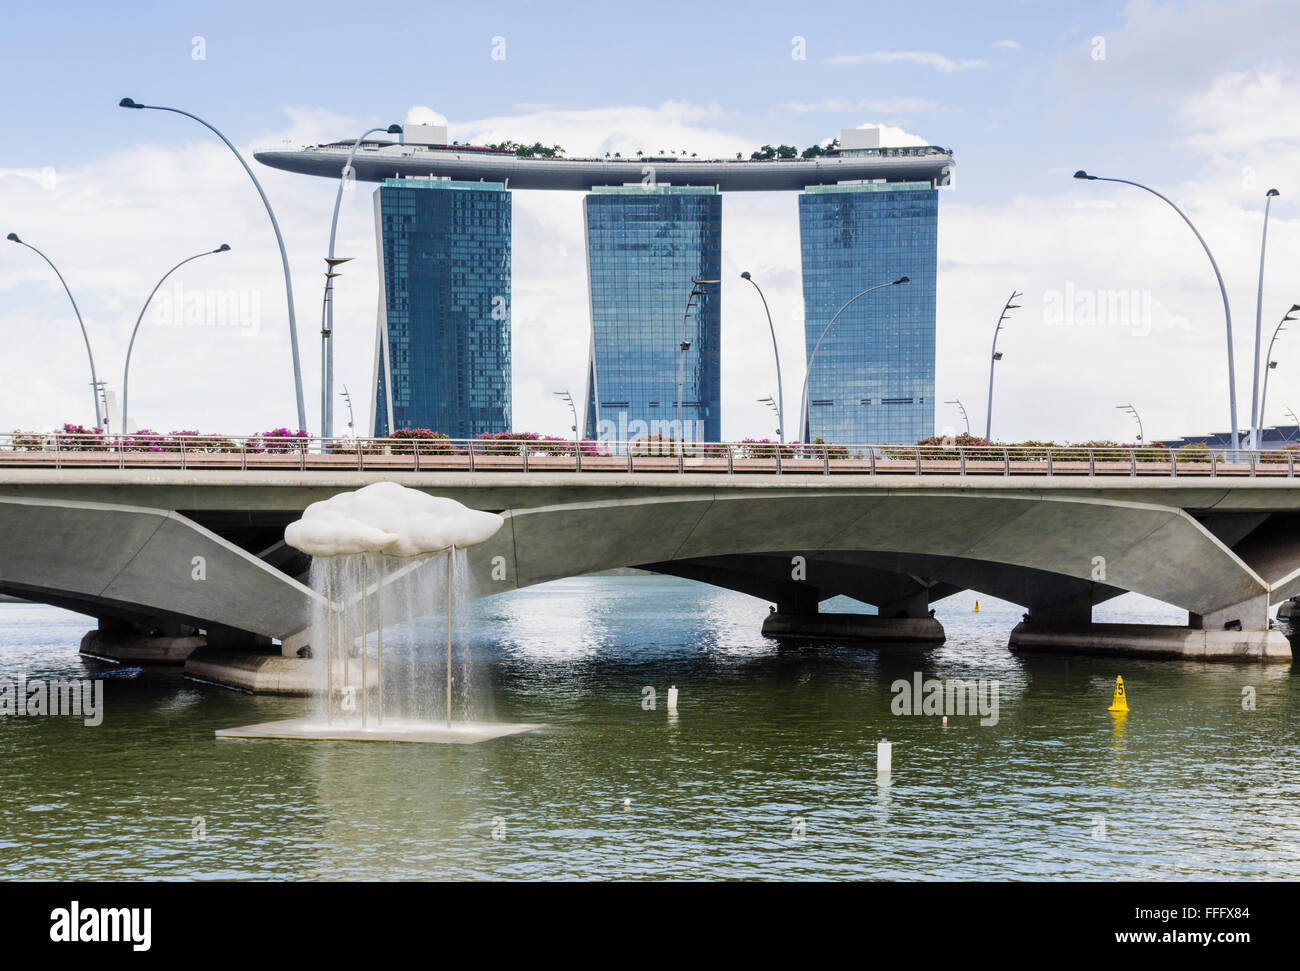 Cloud Nine Raining artwork in the Singapore River overlooked by the iconic Marina Bay Sands at Marina Bay, Singapore Stock Photo